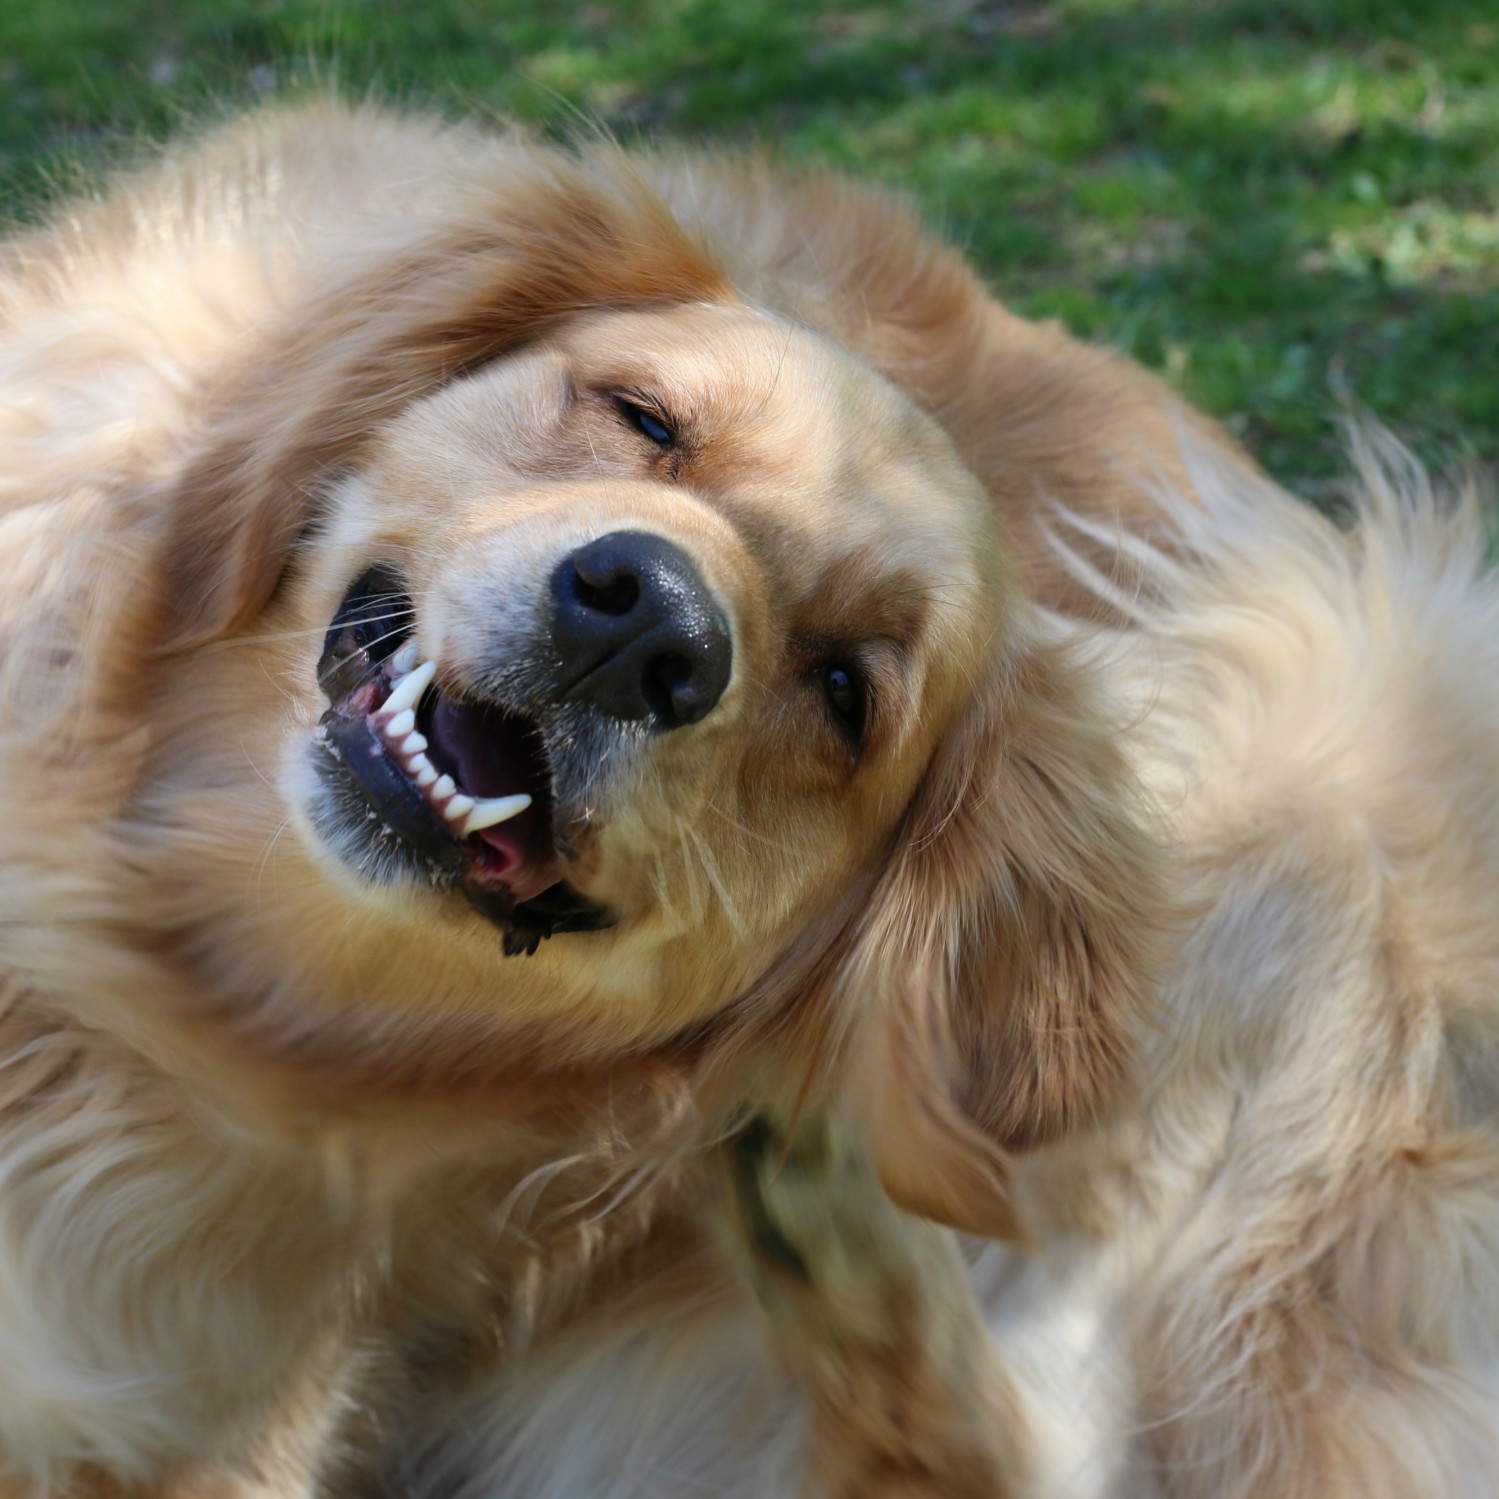 Image of a dog scratching itself